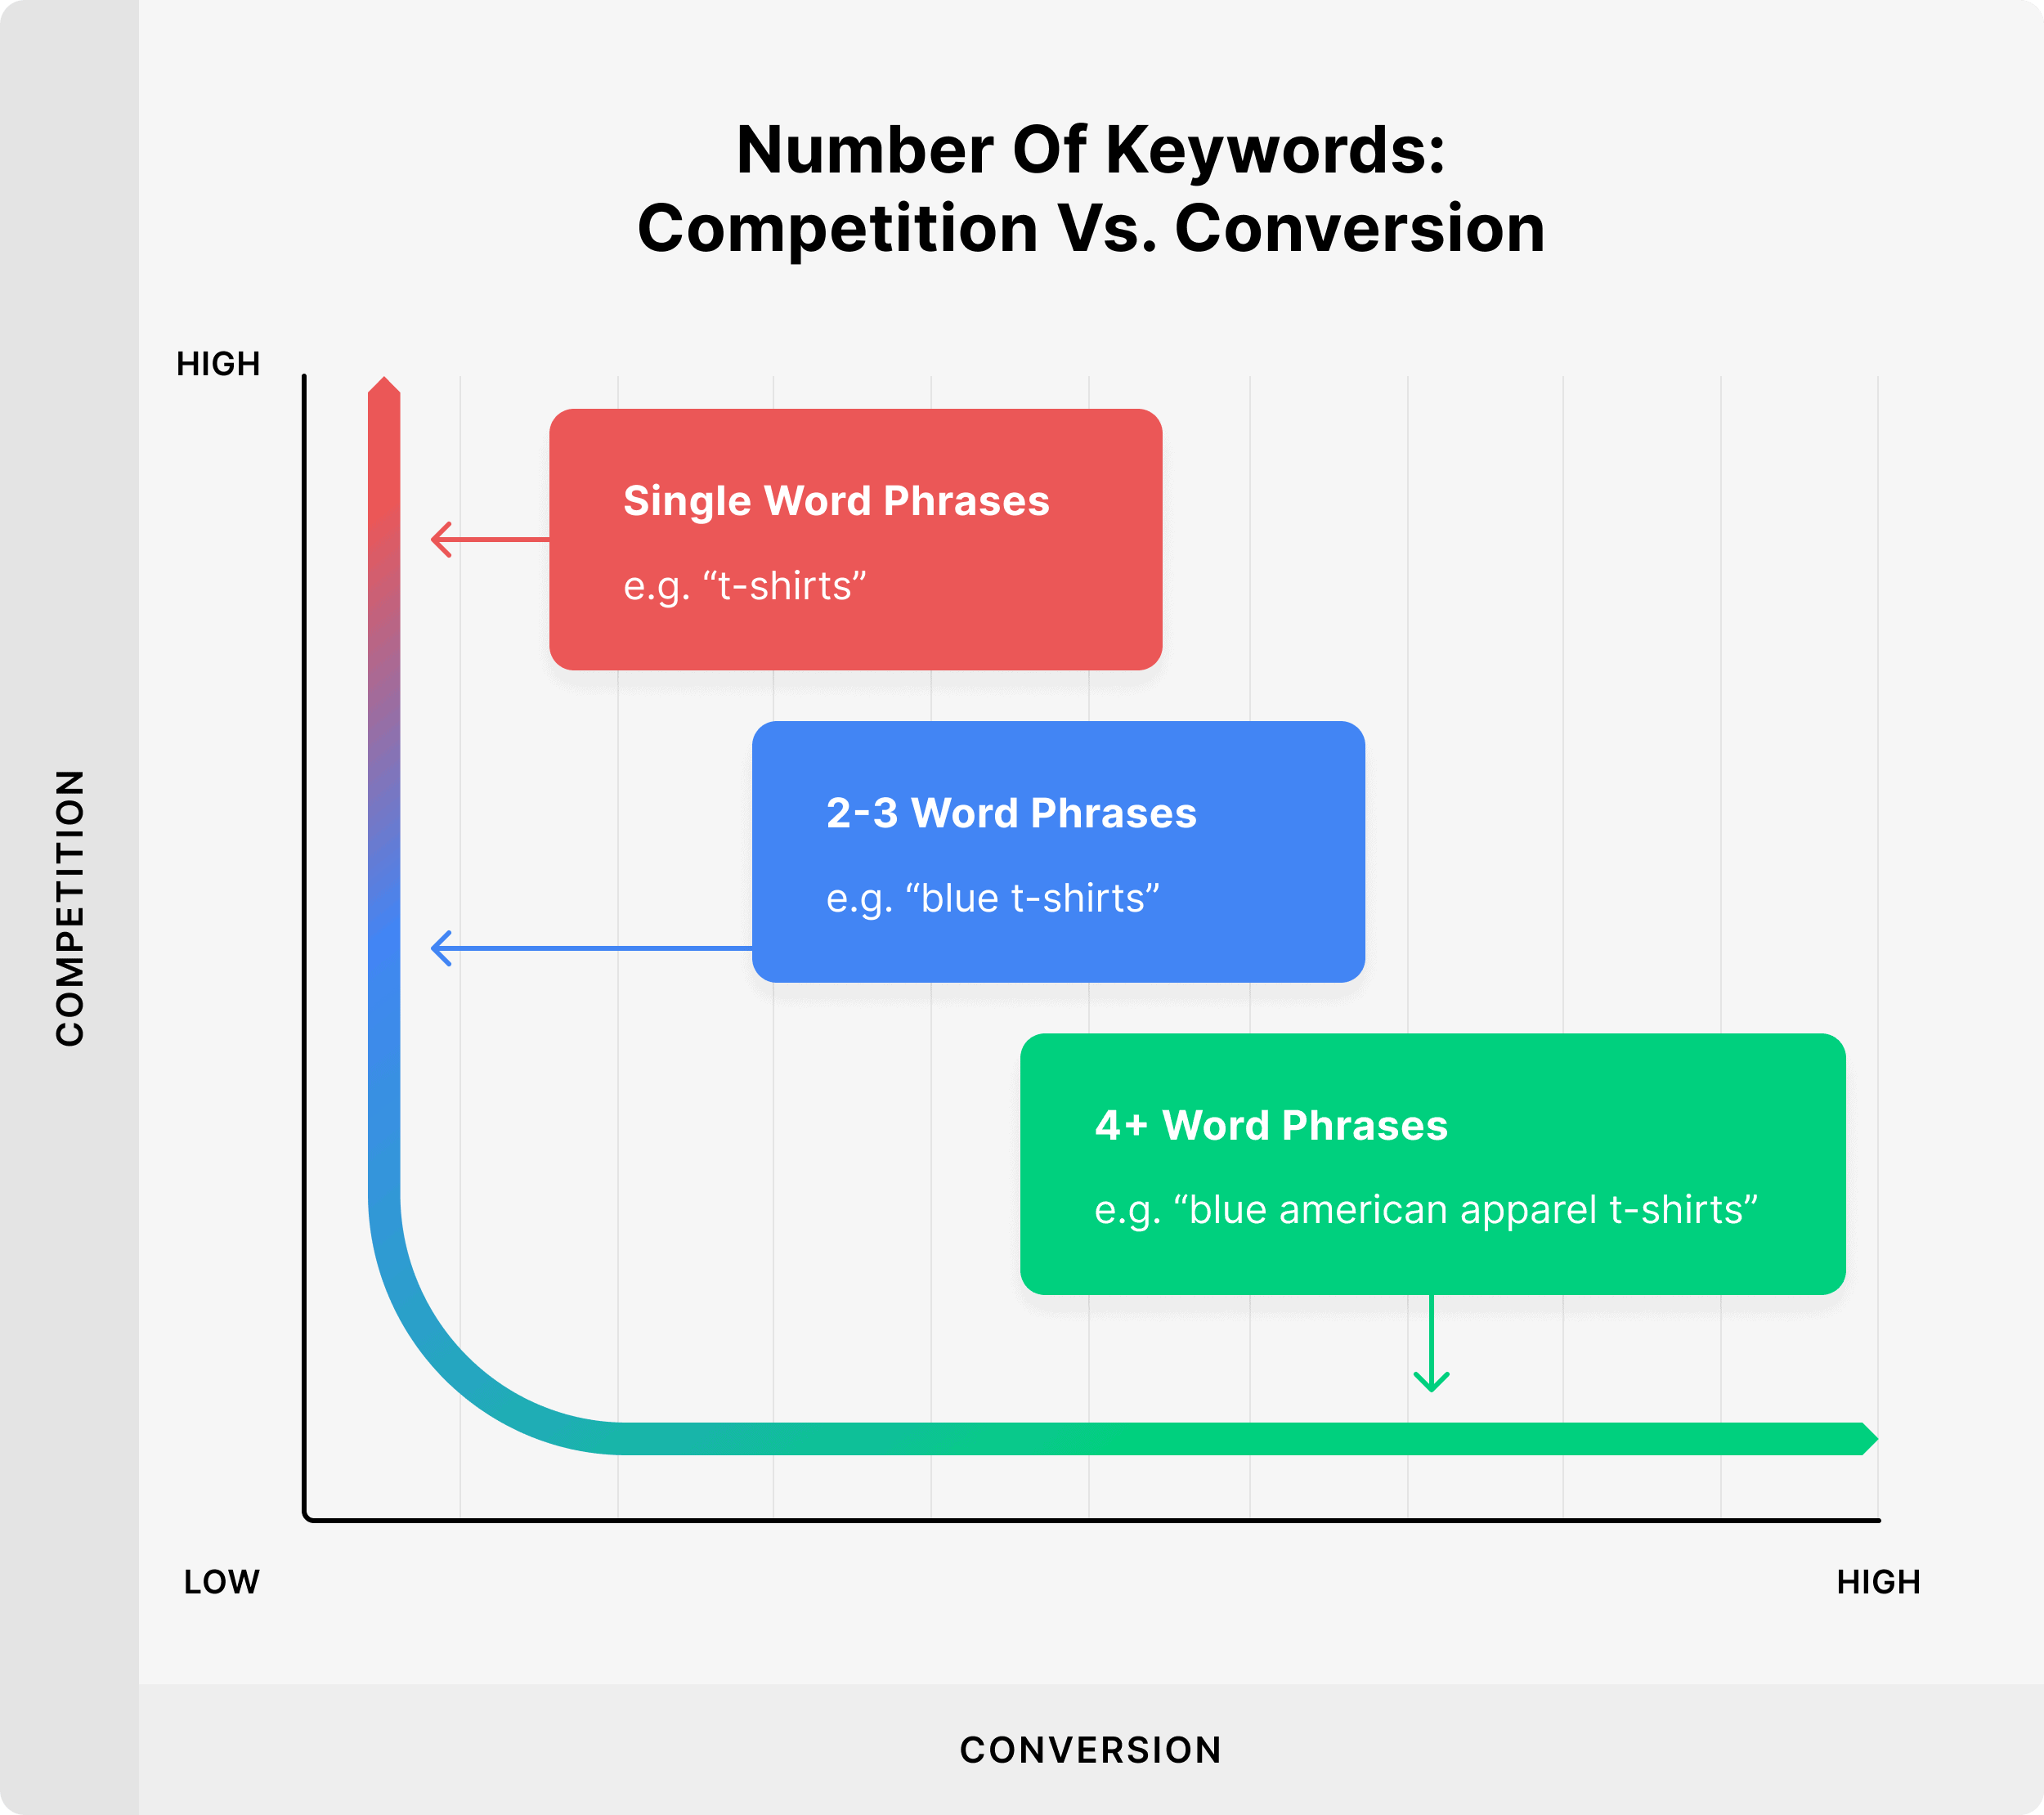 Number of keywords: Competition vs. Conversion